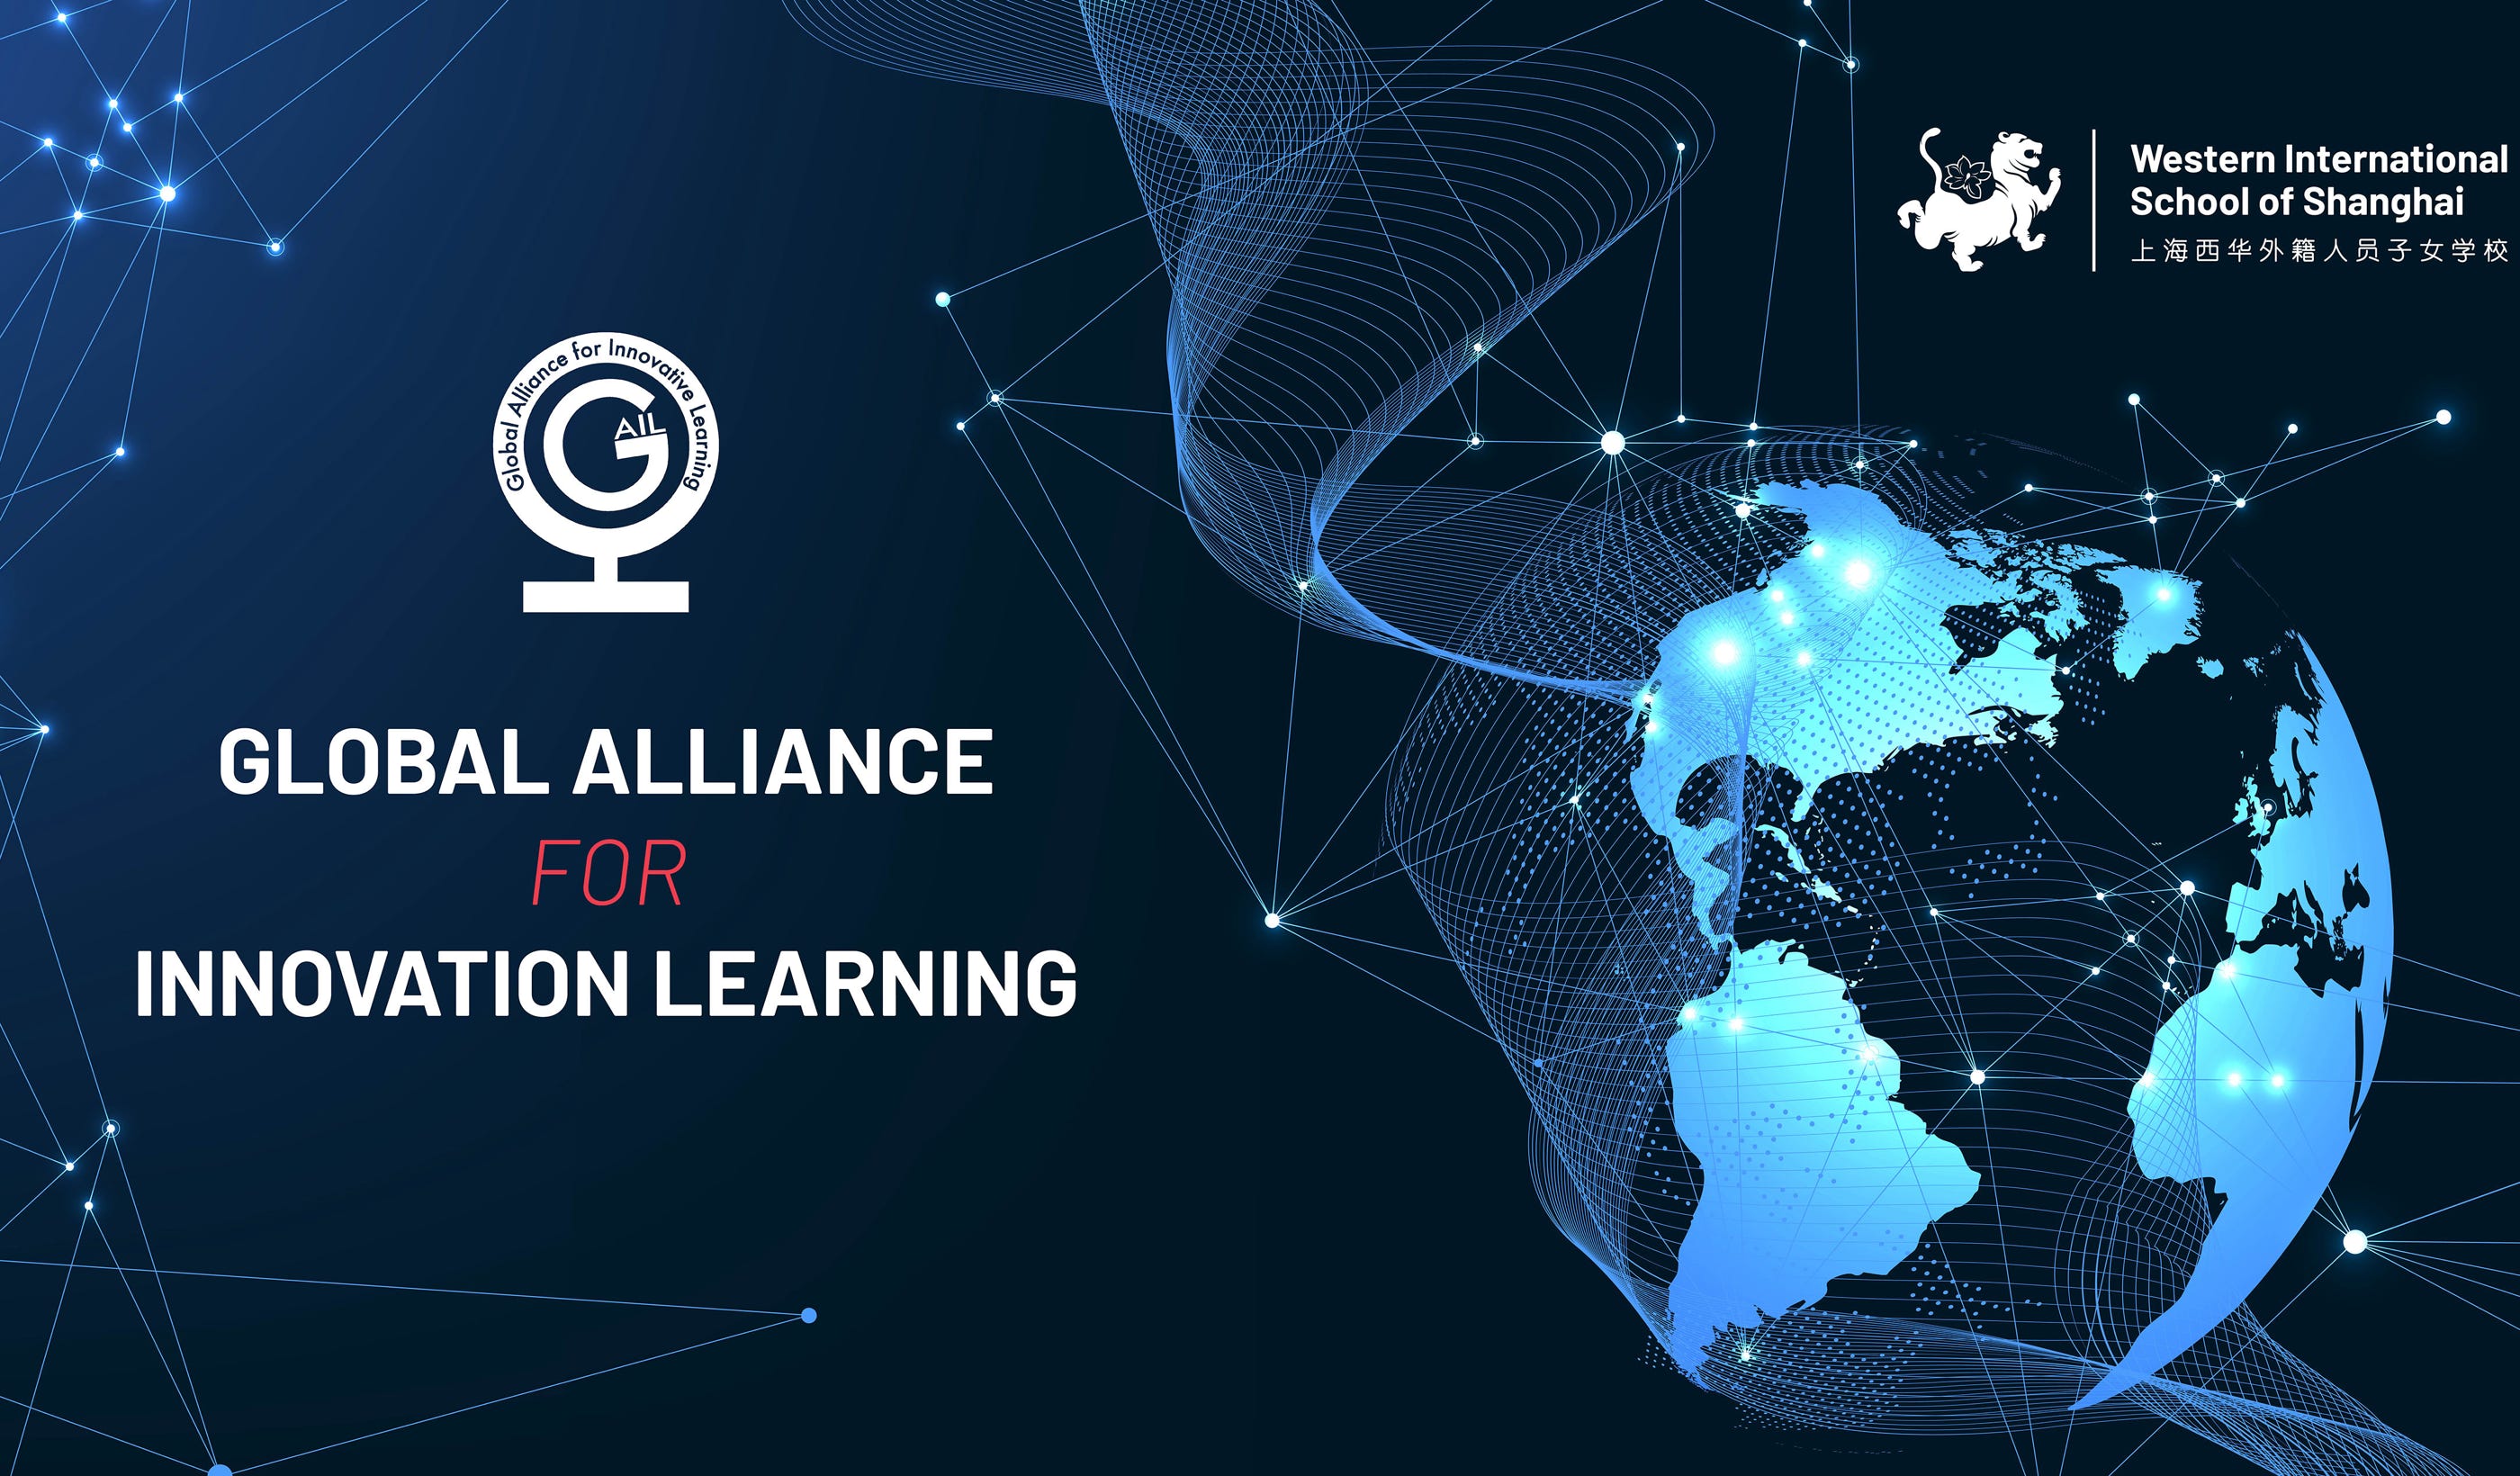 As a founding member of the Global Alliance for Innovative Learning (GAIL), we unveil a series of extraordinary upcoming events that will revolutionize education through collaboration and innovation. Leading the coordination efforts, WISS is thrilled to present the highly anticipated Global AI Conference on the Use of AI in Education. This groundbreaking conference aims to unite educators from member schools worldwide, providing them invaluable insights into how AI can transform education and cultivate innovative learning approaches. Through a dynamic combination of expert presentations, interactive sessions, and stimulating discussions, participants will gain a profound understanding of the diverse applications of AI in teaching, learning, and educational management. Don't miss this opportunity to be part of an educational revolution and shape the future of learning! 